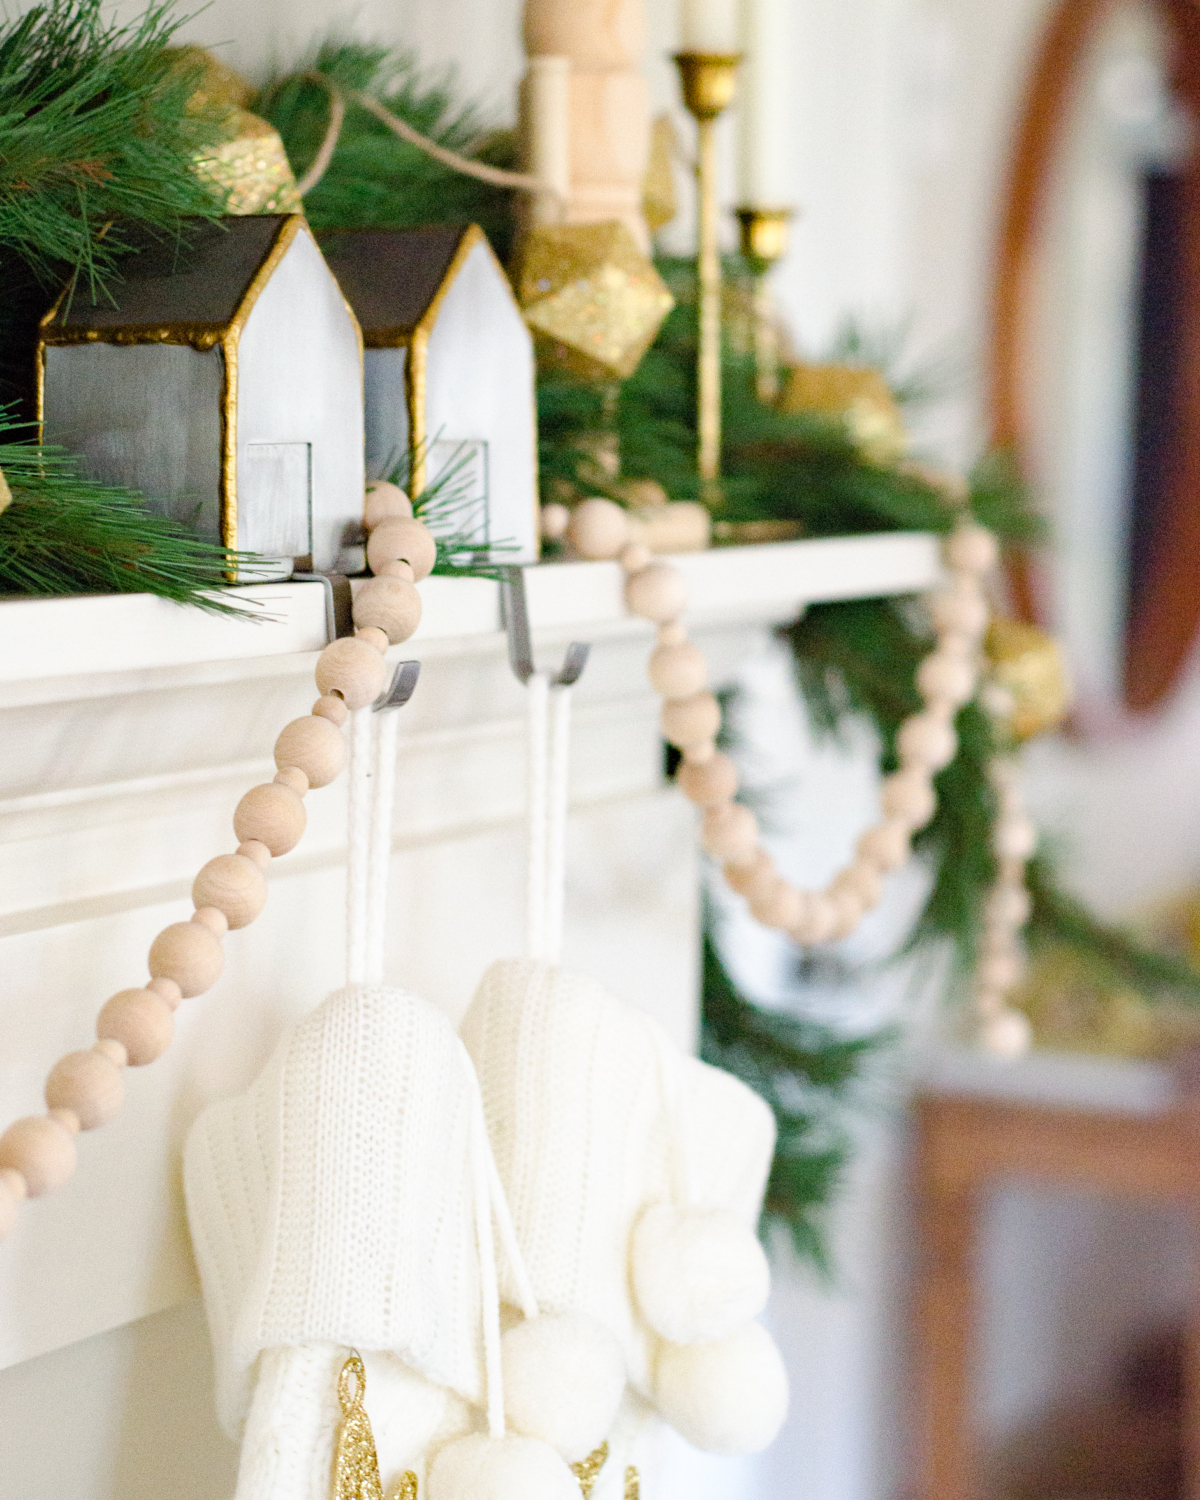 A simple and classic Christmas mantle with greenery, white cable knit stockings, nutcrackers, and gold accents. 2017 Holiday Housewalk